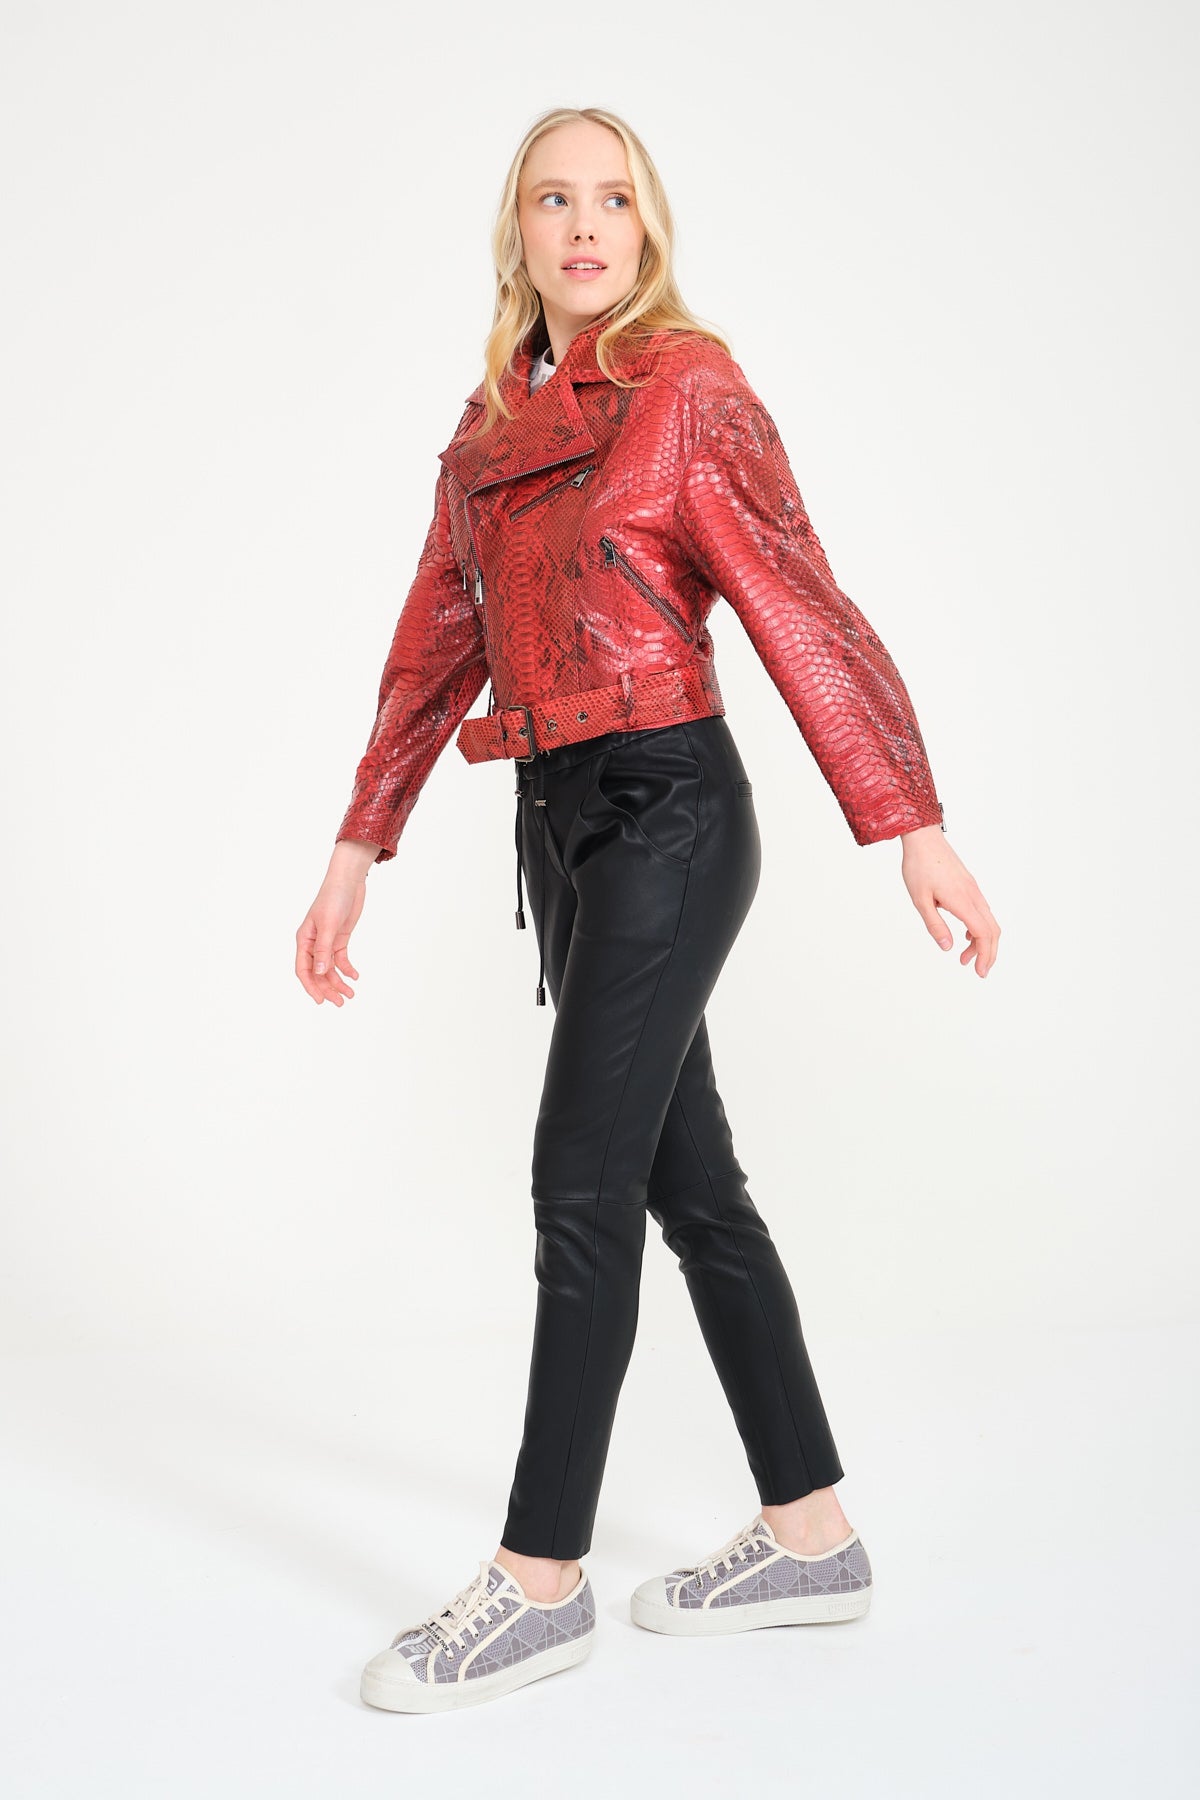 Red Python Leather Jacket